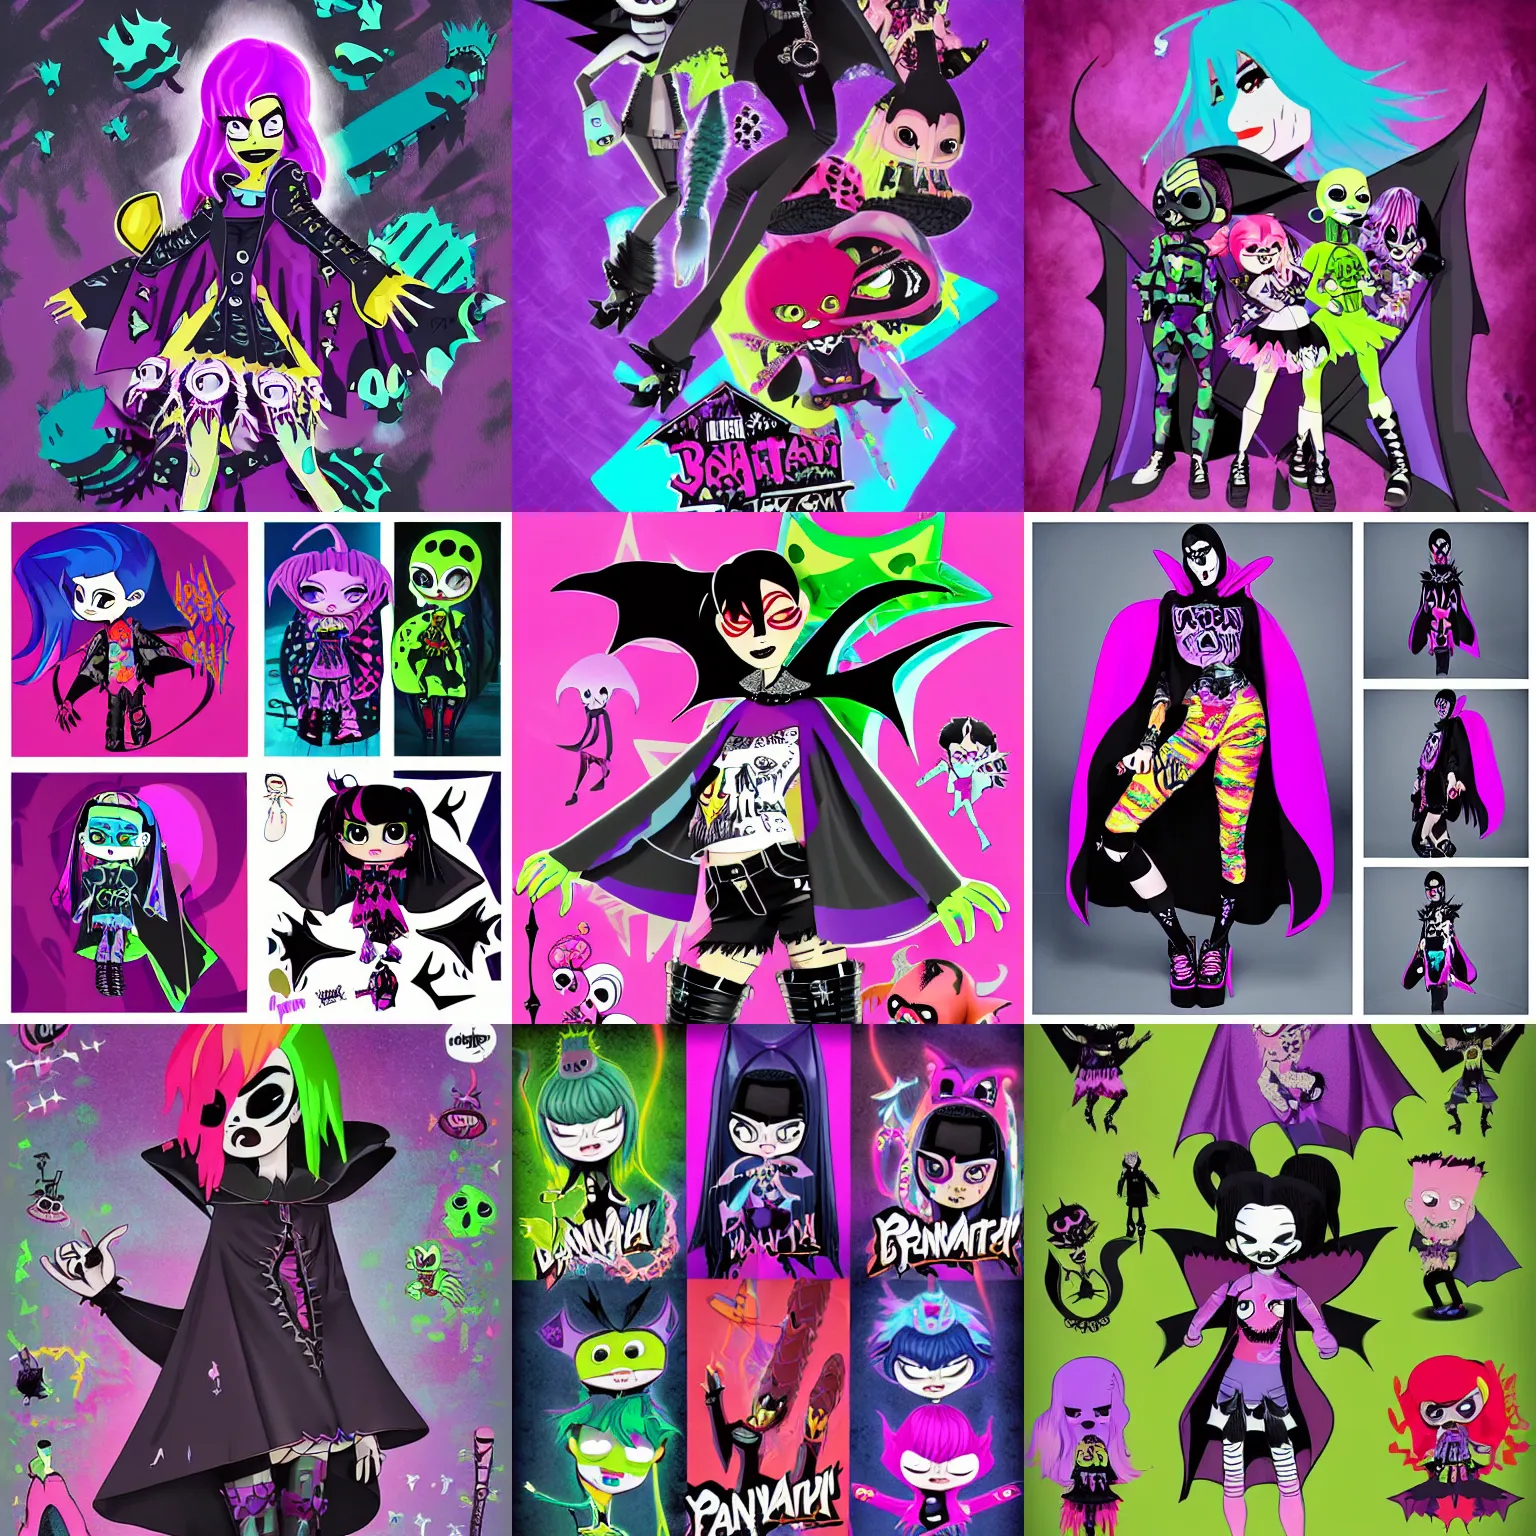 Prompt: lisa frank gothic emo punk vampiric rockstar vampire kraken wearing a bat shaped poncho cape with platform shoes character designs of various shapes and sizes by genndy tartakovsky and splatoon by nintendo for the new hotel transylvania film